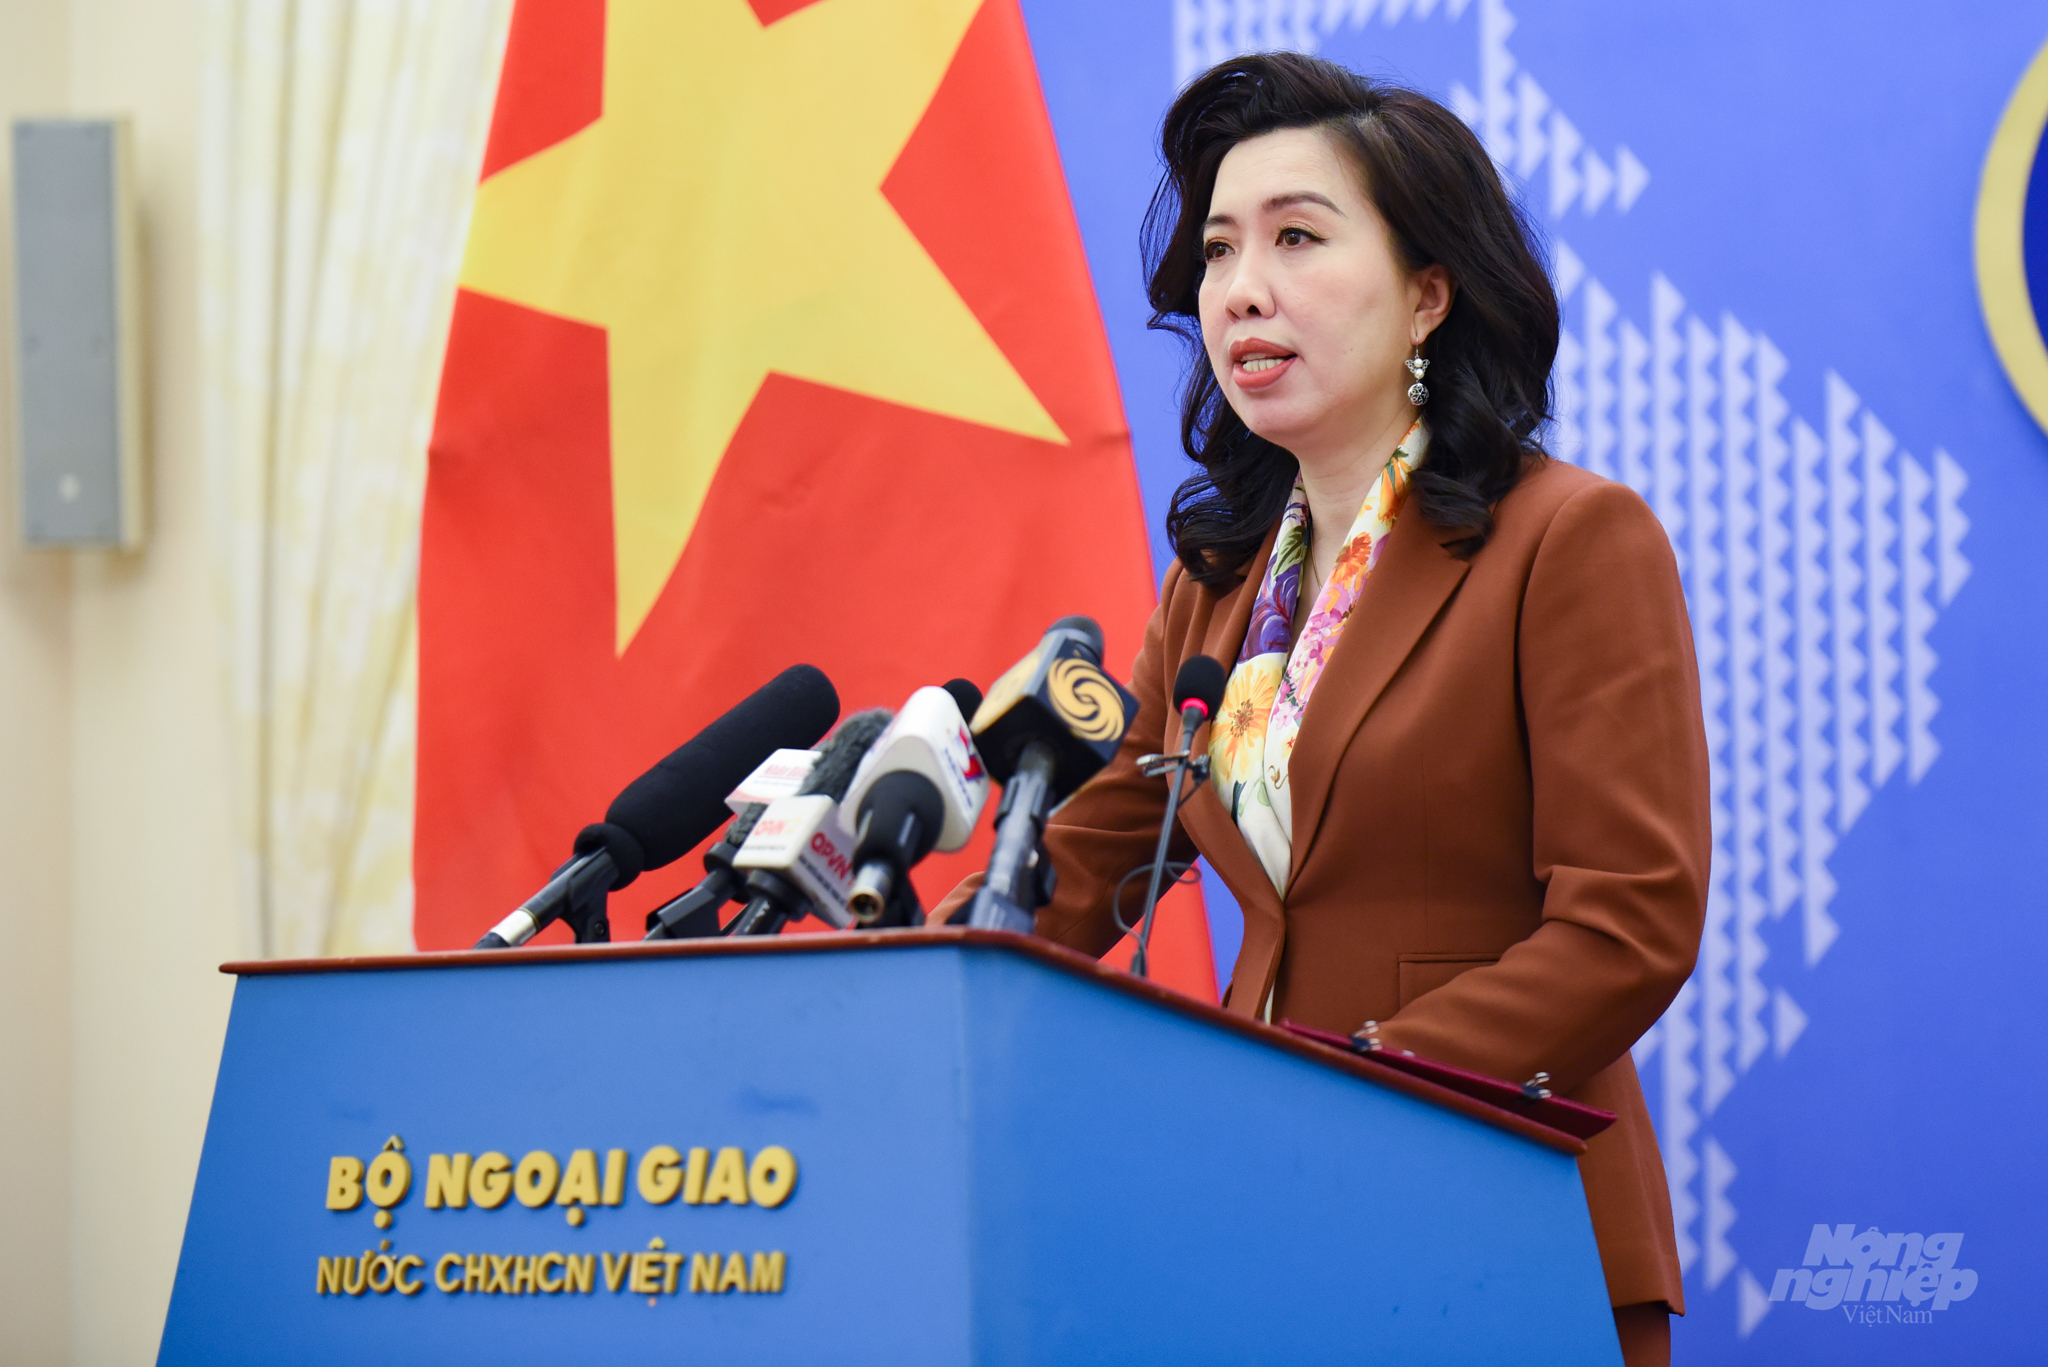 Ms. Le Thi Thu Hang, spokeswoman of the Ministry of Foreign Affairs, answering questions about the US intention to impose tariffs of more than 400% on honey. Photo: Tung Dinh.